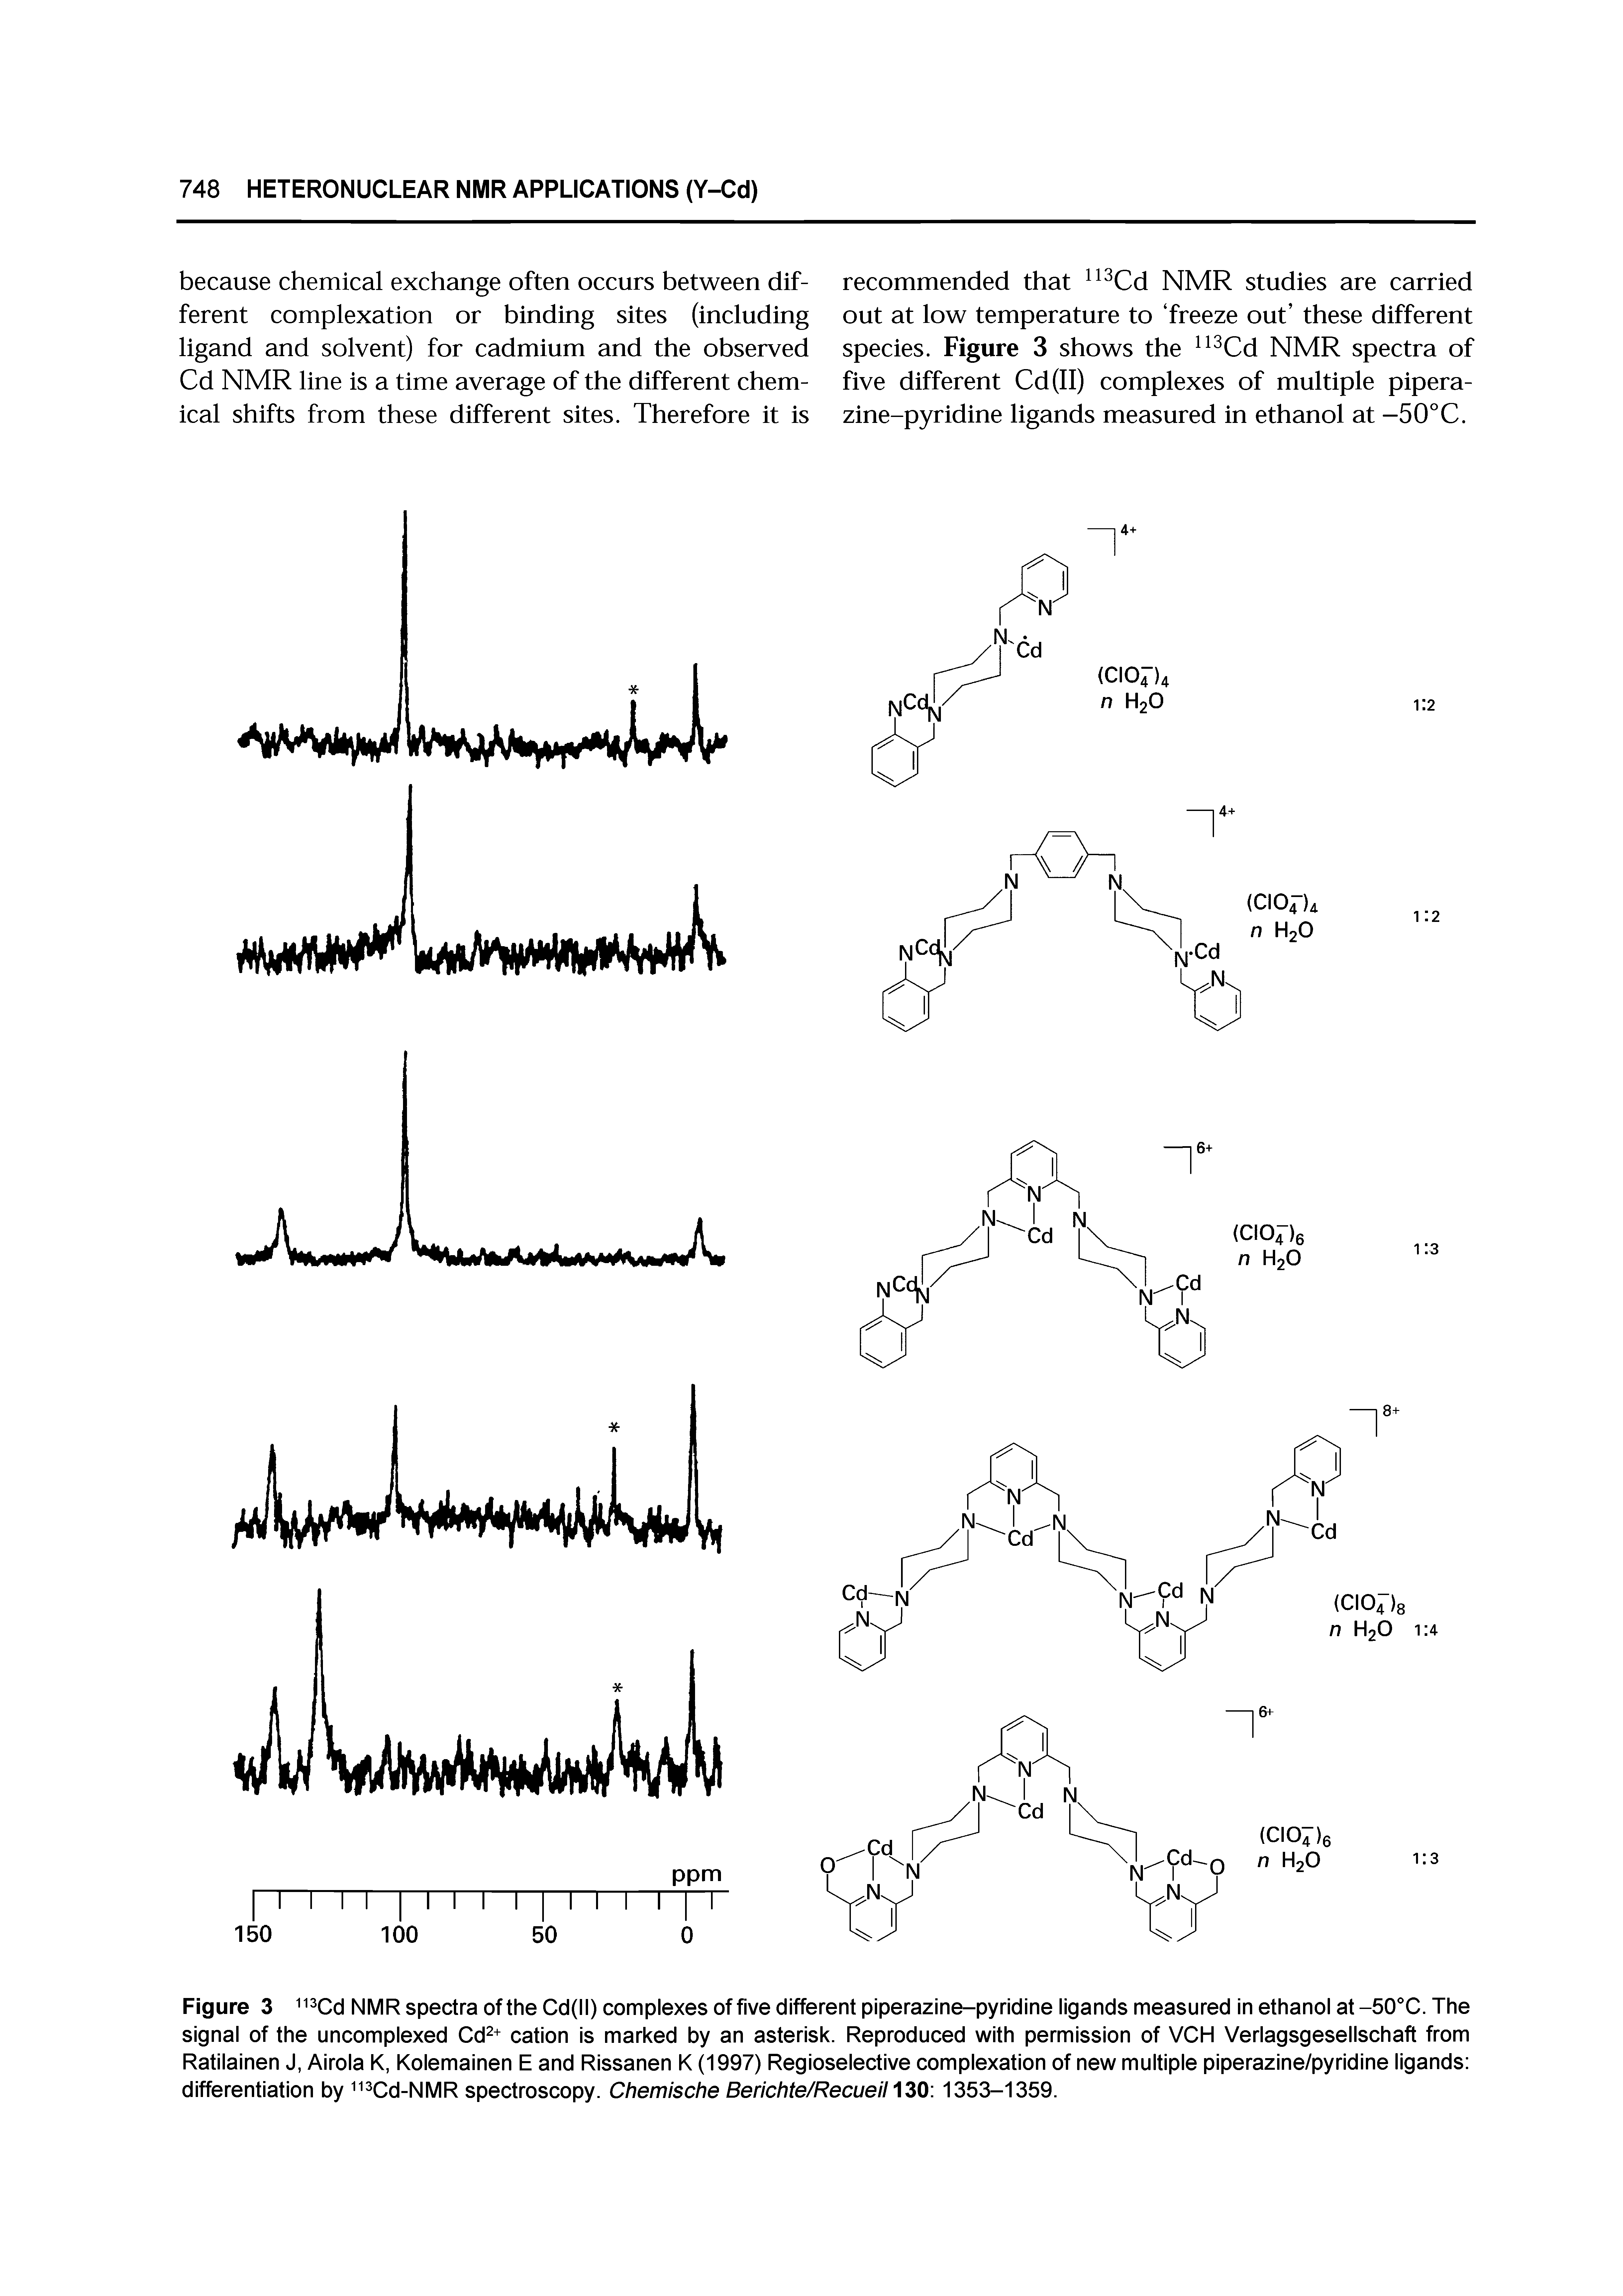 Figure 3 Cd NMR spectra of the Cd(ll) complexes of five different piperazine-pyridine ligands measured in ethanol at -50 C. The signal of the uncomplexed Cd cation is marked by an asterisk. Reproduced with permission of VCH Verlagsgesellschaft from Ratilainen J, Airola K, Kolemainen E and Rissanen K (1997) Regioselective complexation of new multiple piperazine/pyridine ligands differentiation by Cd-NMR spectroscopy. Chemische Berichte/RecueinZO 1353-1359.